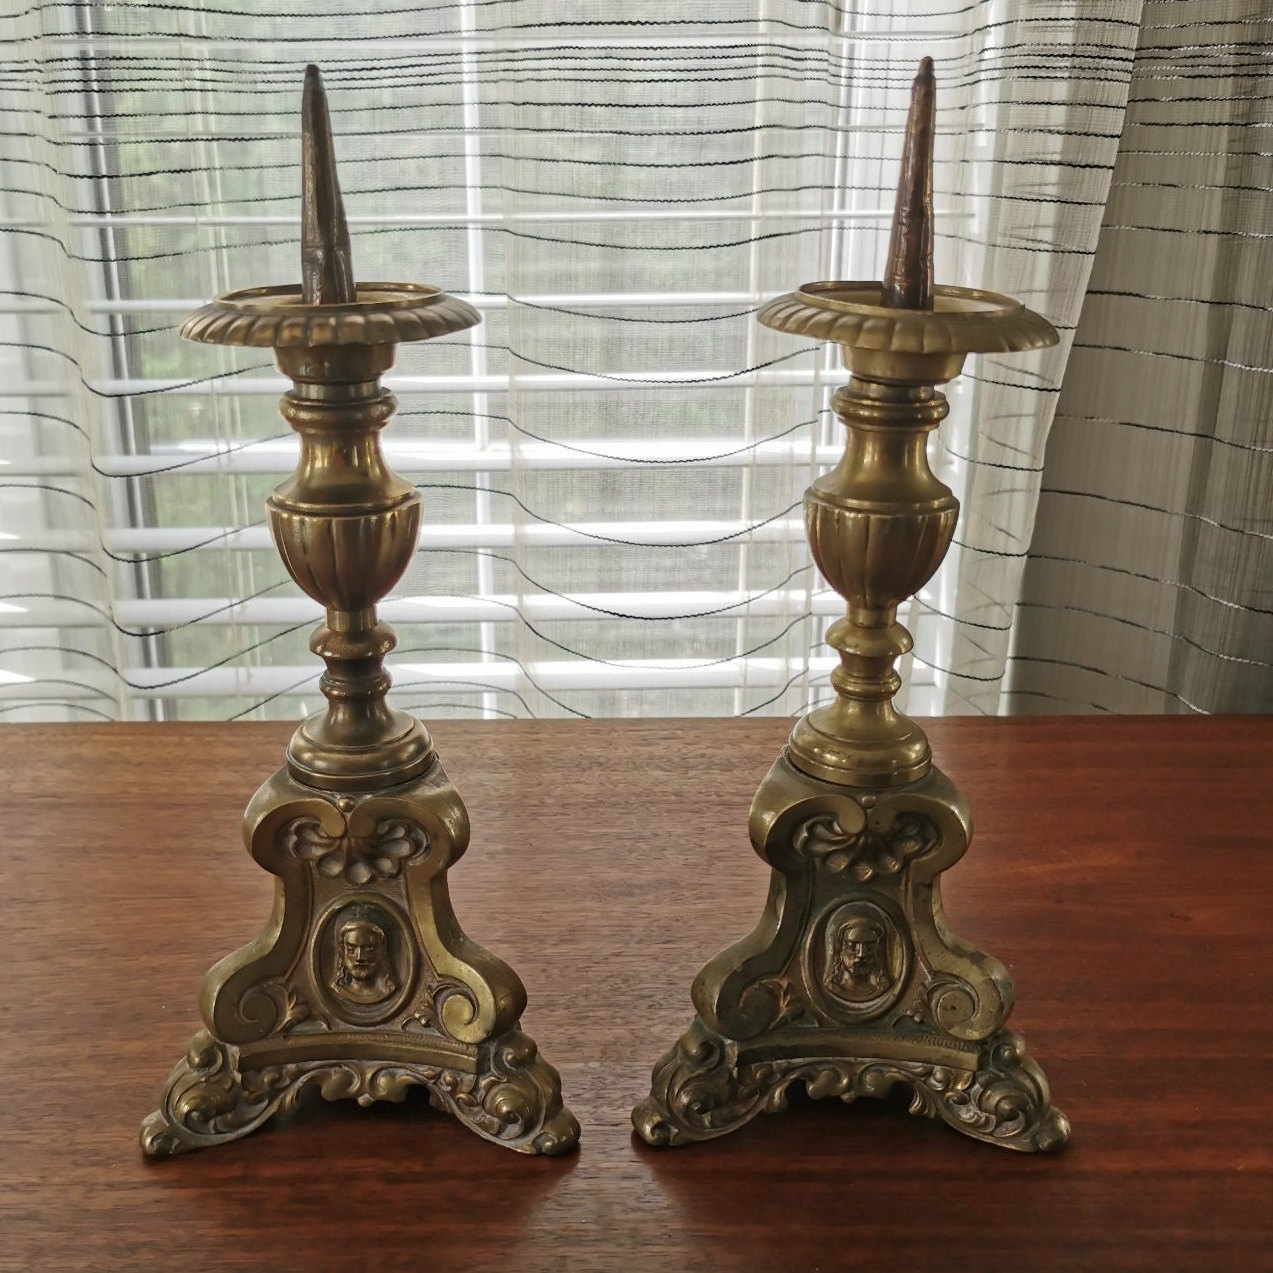 sales cheapest order Brass C. Pricket Pricket Candle Holders Set of Holders  2, Canadian Vintage 19th French Religious Alter Candle Holy Altar Family  Candlesticks Candleholders 11.75 